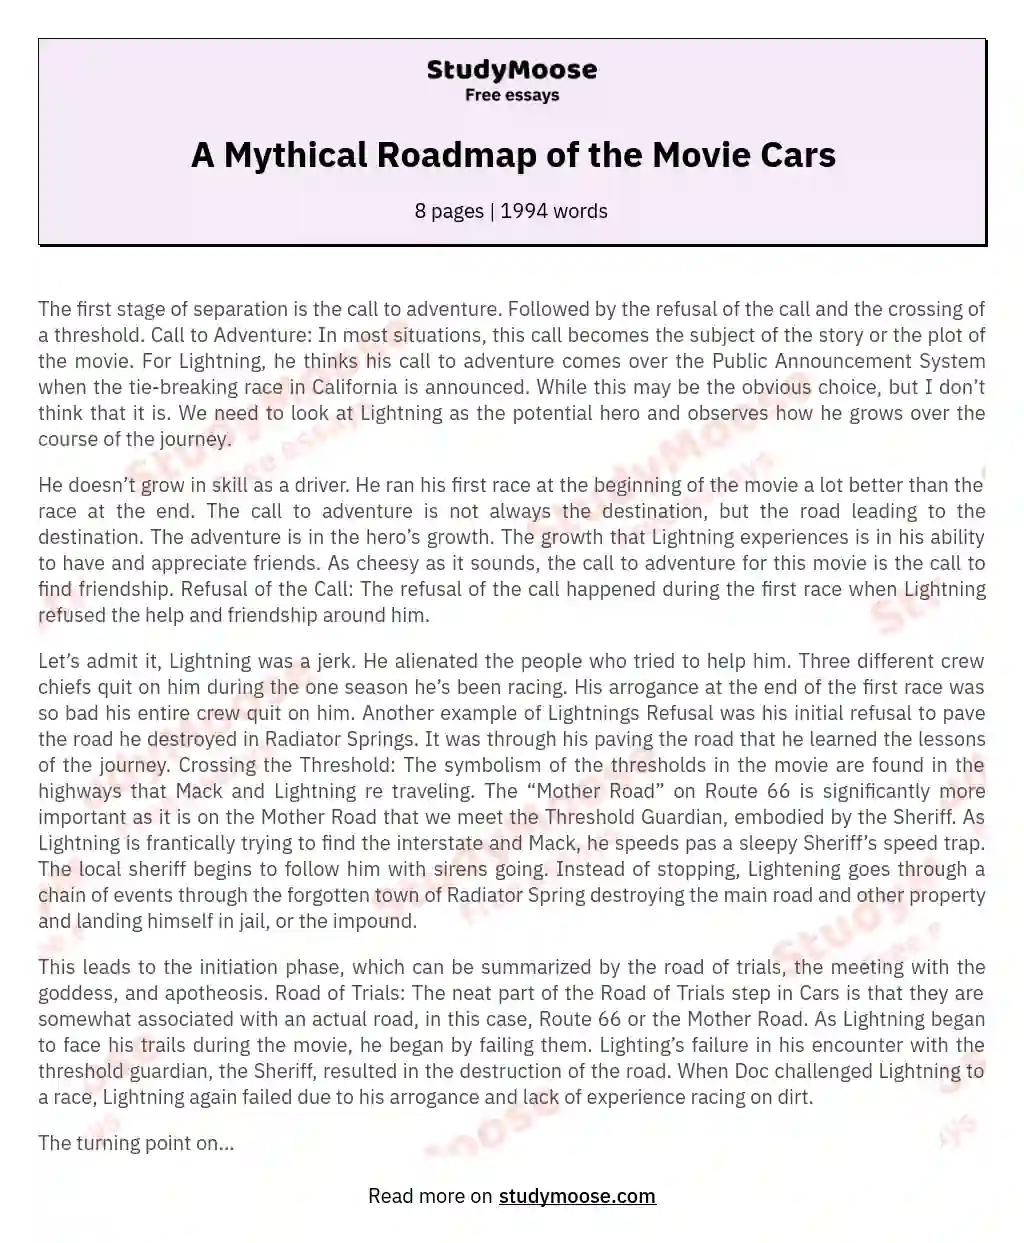 A Mythical Roadmap of the Movie Cars essay